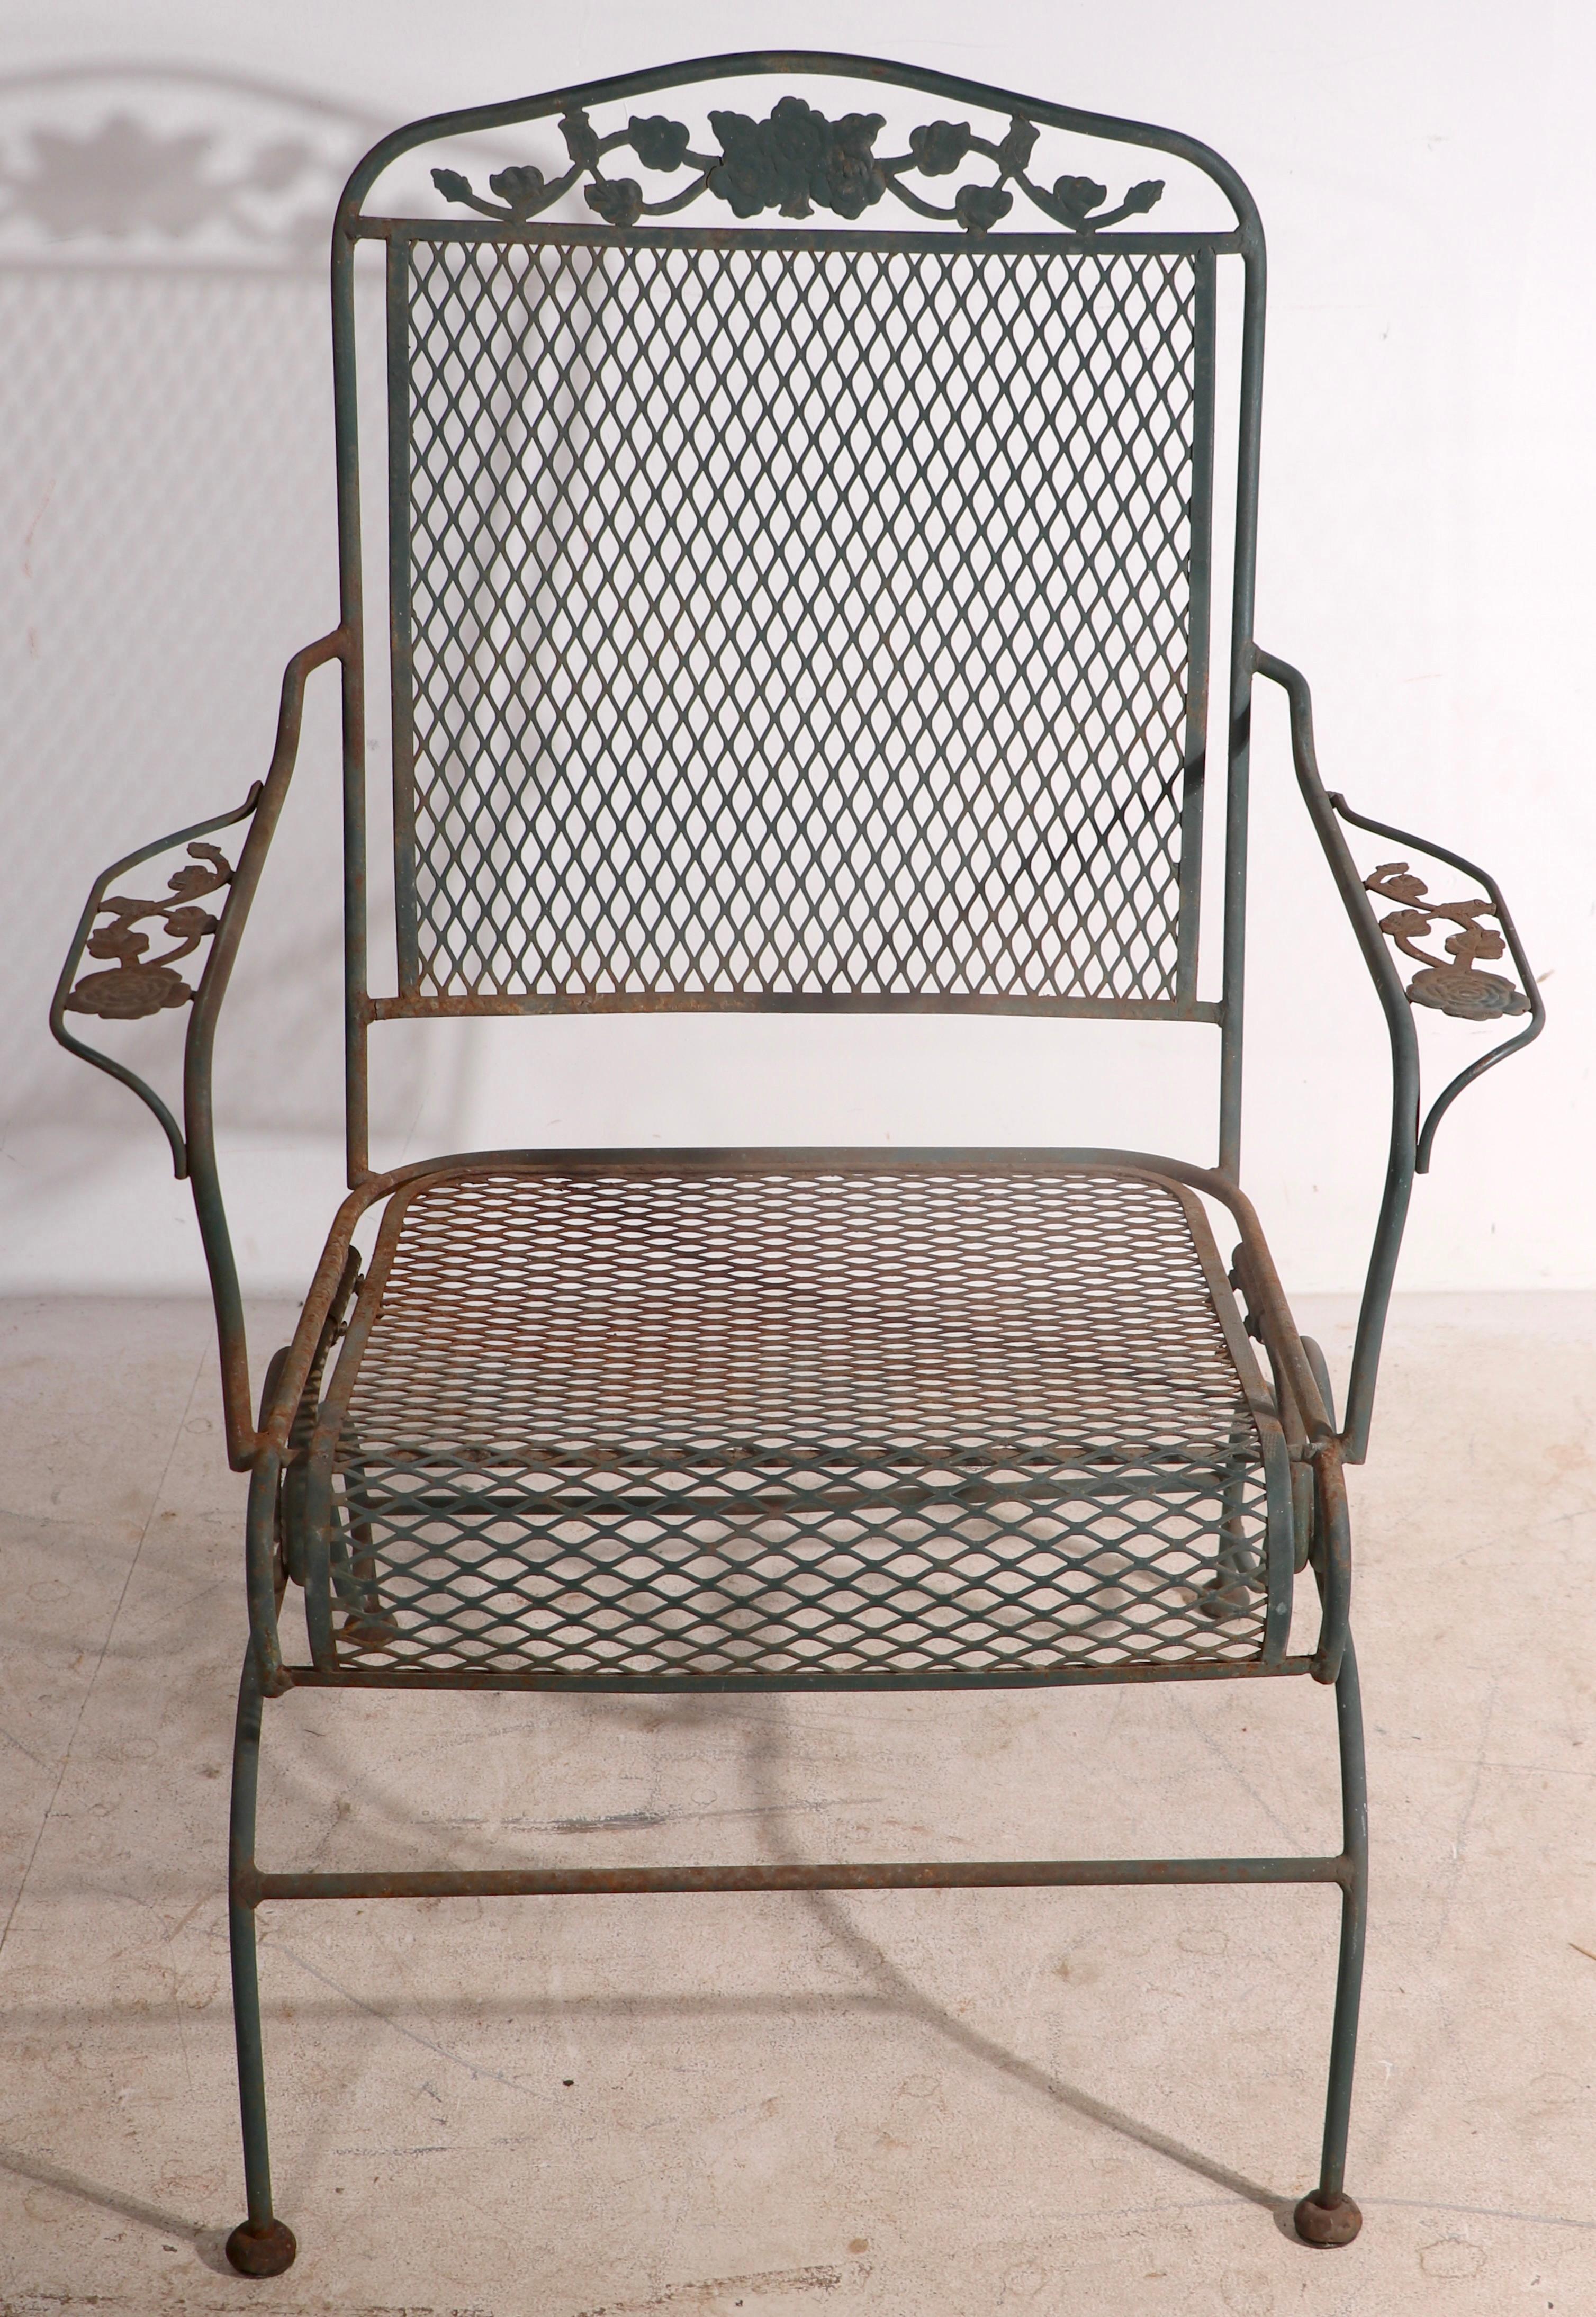 Wrought iron and metal mesh spring seat lounge chair by Meadowcraft, in the Dogwood pattern, circa 1950 - 1960's. The chair is in very good, original estate condition, showing only light cosmetic wear to finish, normal and consistent with age.